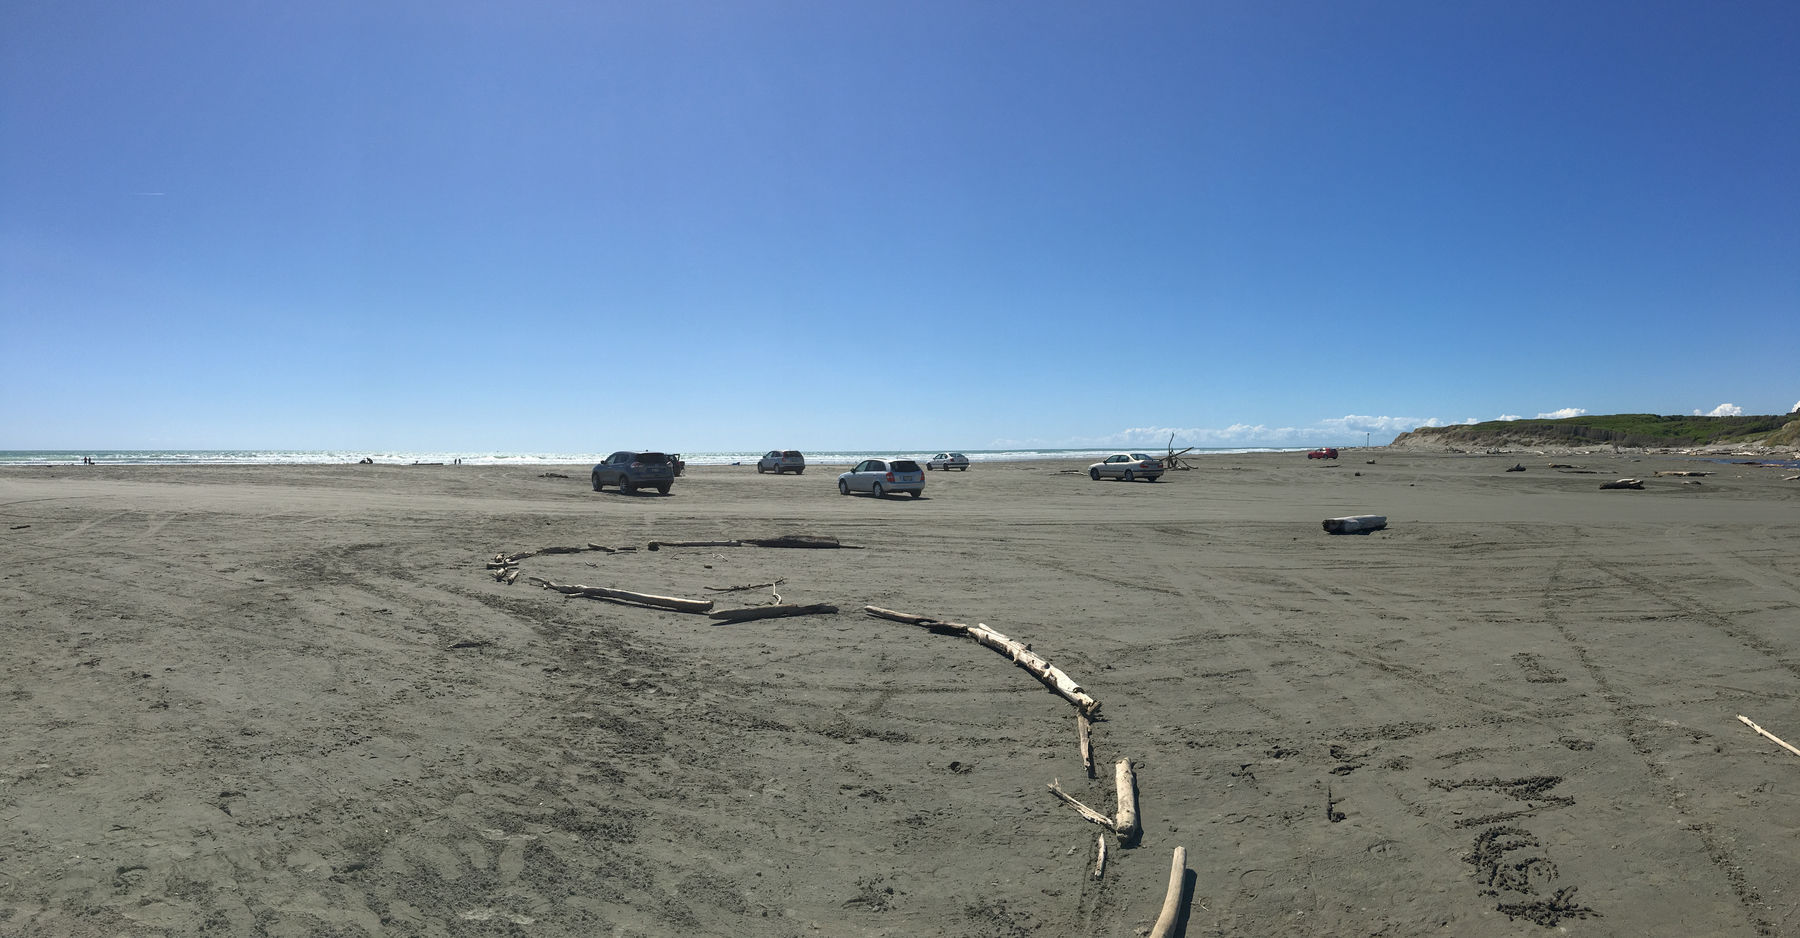 A photo of several cars parked up on a beach, with the waves crashing in the background in the mid afternoon on a beautiful late spring day